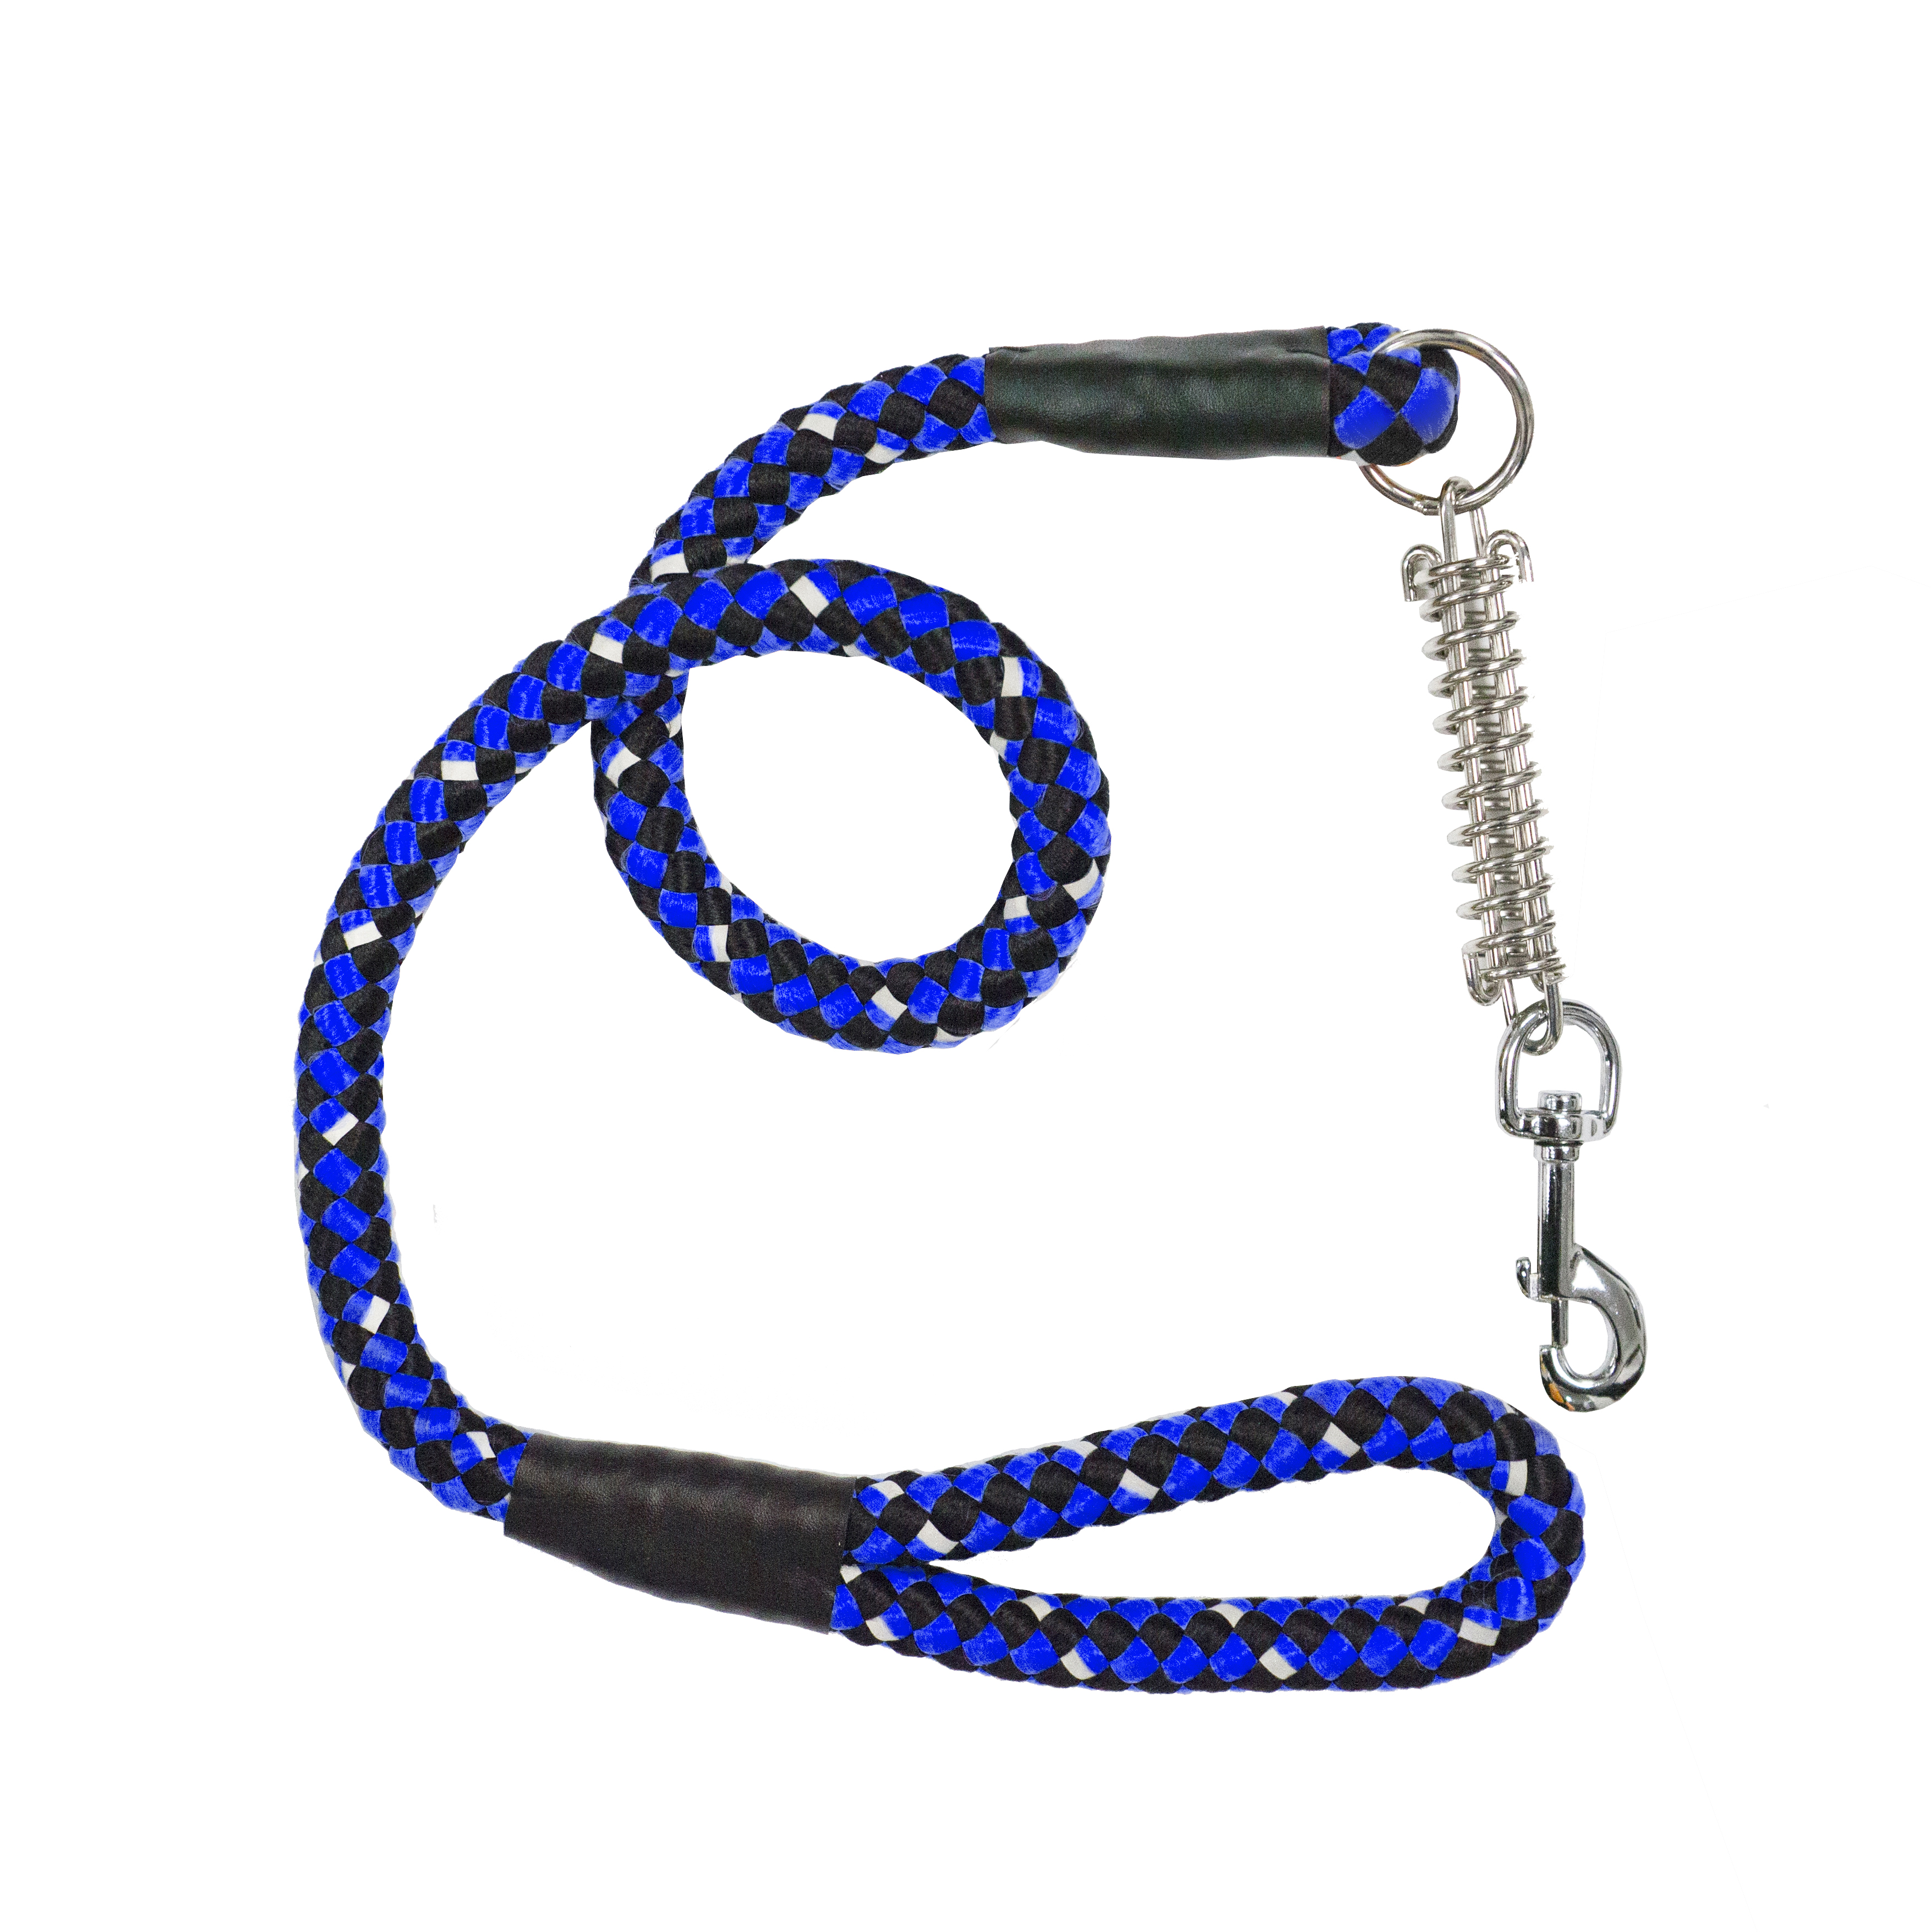 Petique Dragonfly Reflectiful Leash with Shock Absorber